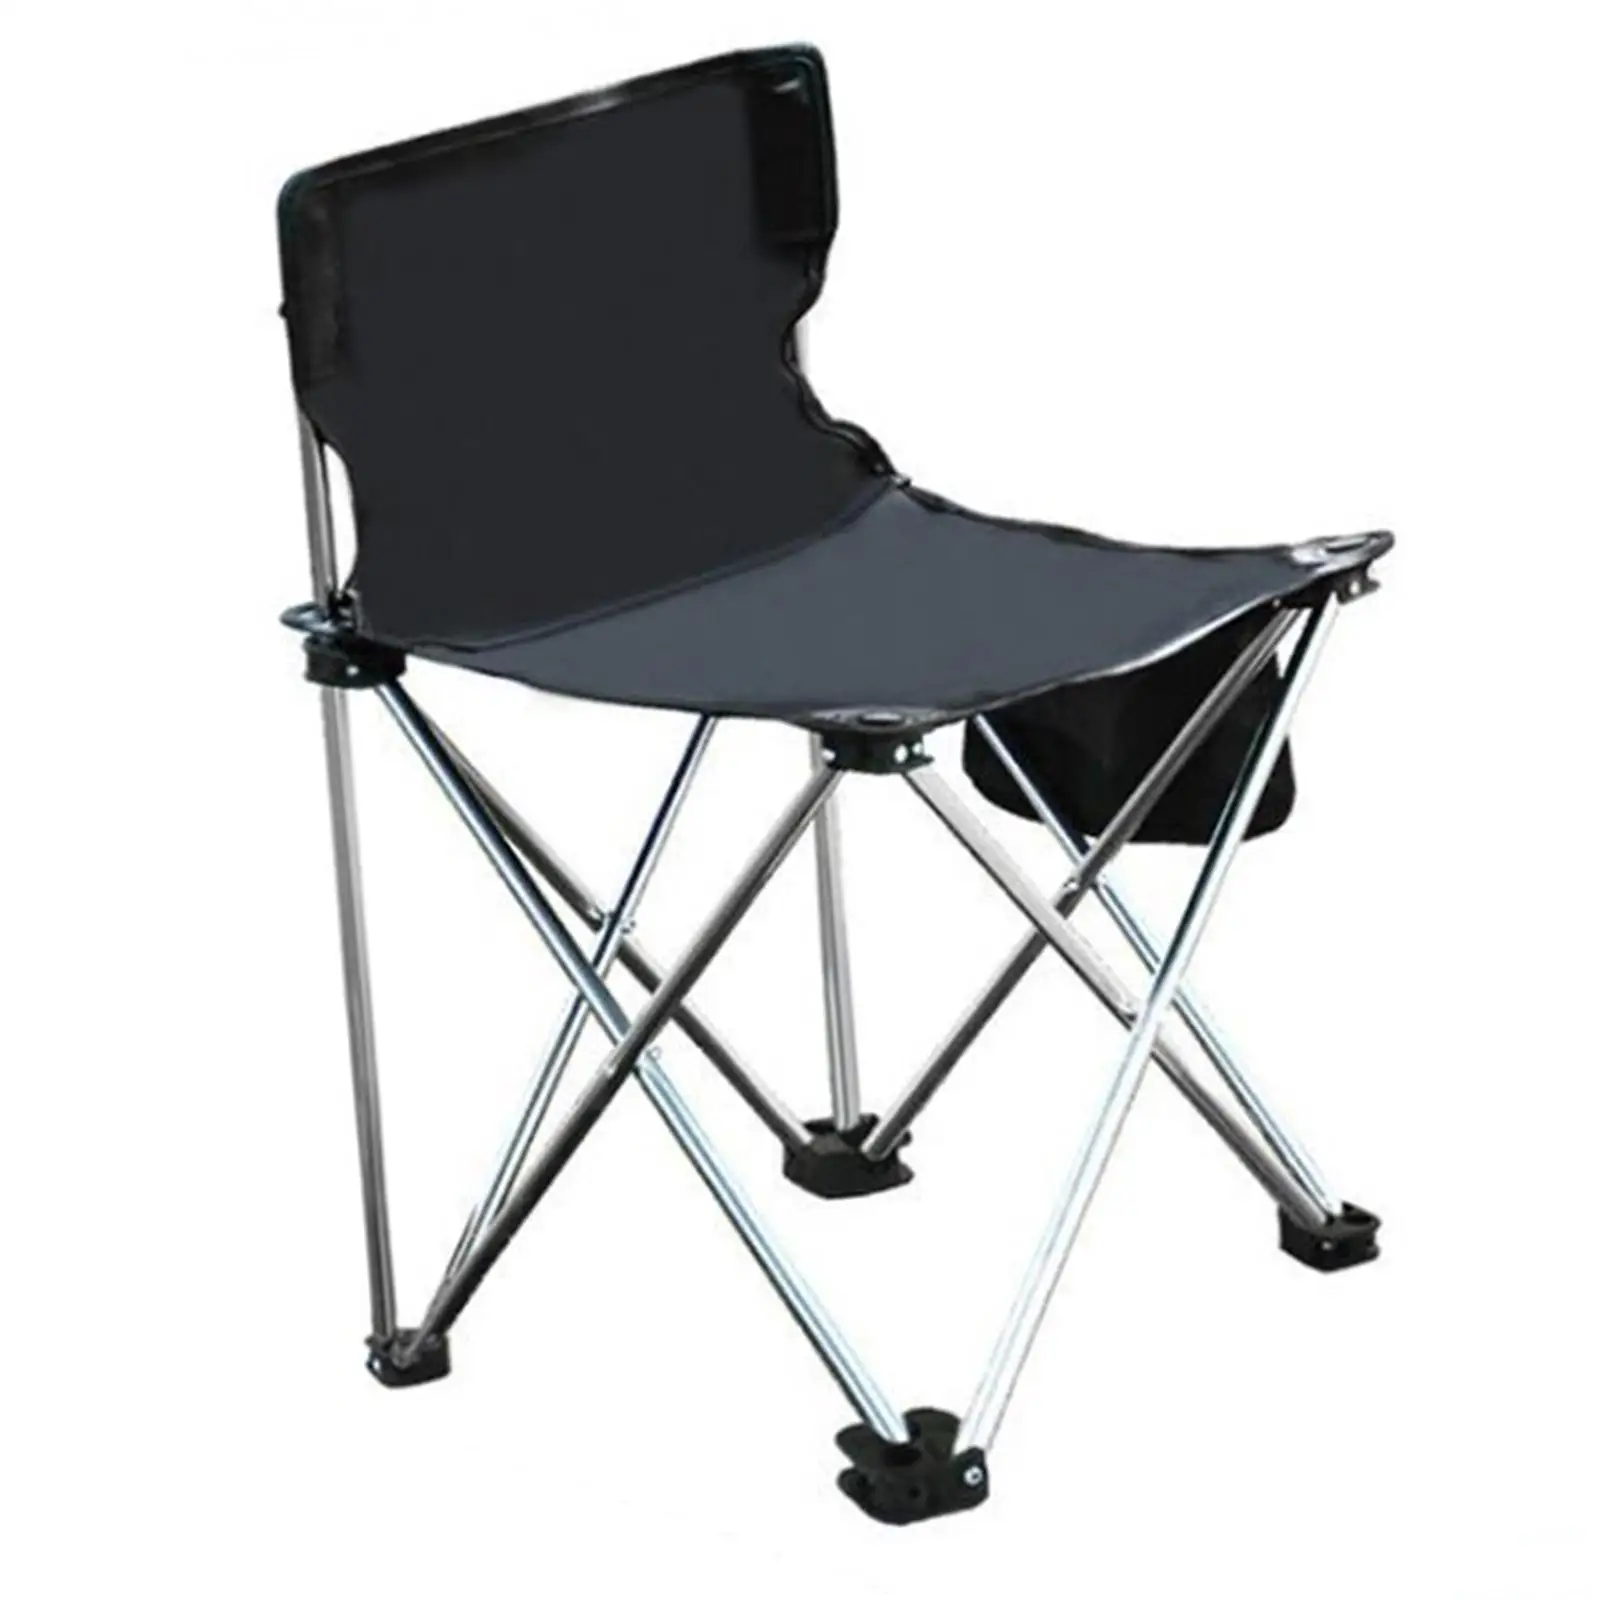 Portable Camping Chair Folding Chair for Outside High Back Collapsible Chair for Patio